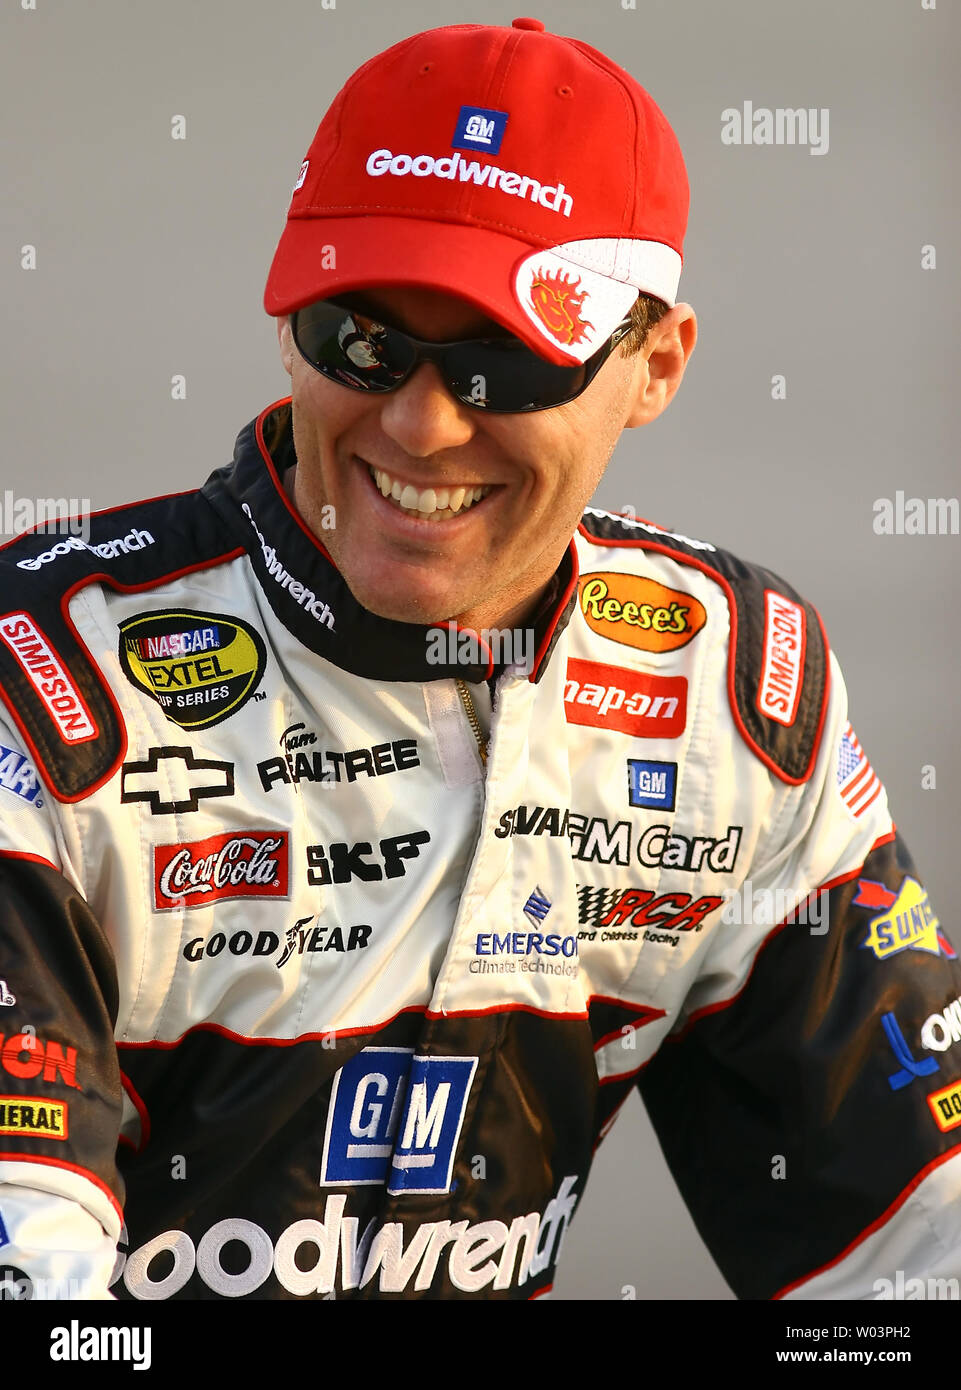 Kevin Harvick, driver of the #29 GM Goodwrench Chevrolet, smiles at drivers introductions before the Crown Royal 400, at the Richmond International Raceway in Richmond, VA on May 6, 2006. (UPI Photo/Christopher Rossi) Stock Photo